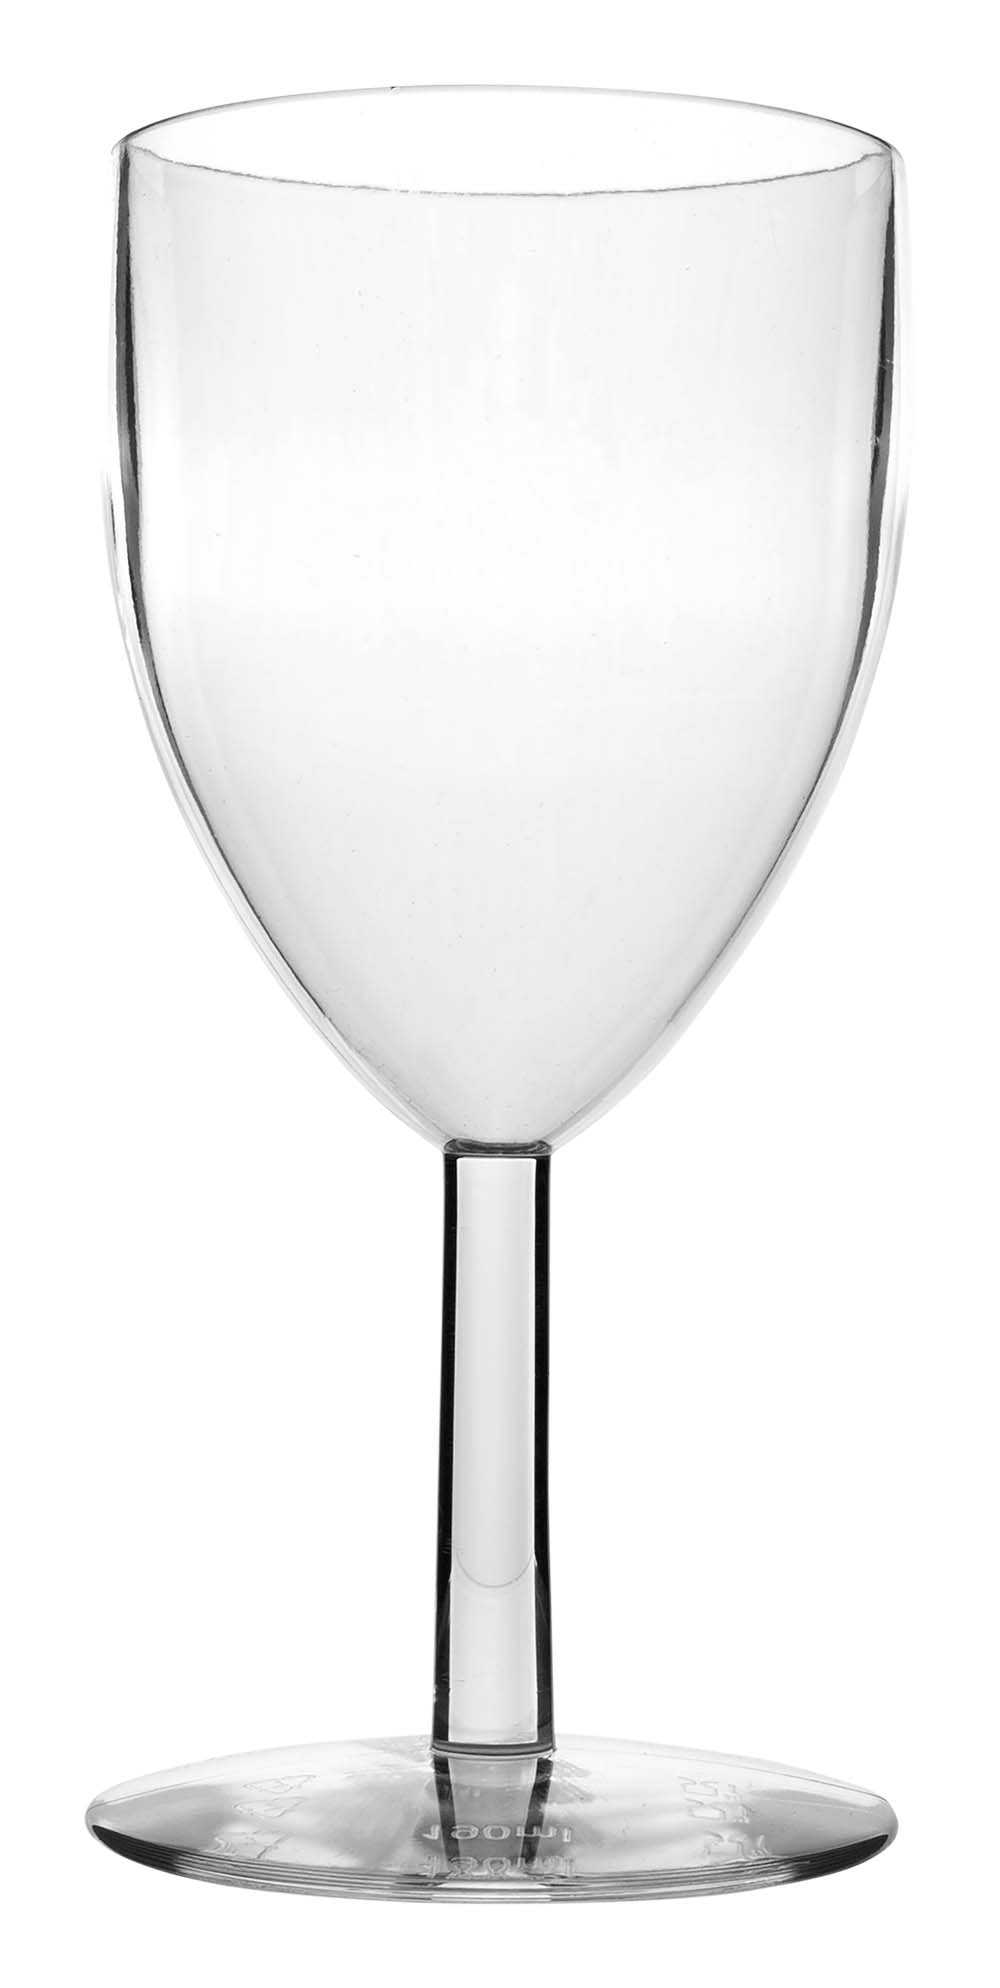 6101493 An extra sturdy wine glass. Made of 100% polycarbonate This makes the glasses almost unbreakable, light weight and scratch proof. This glass is also dishwasher safe.